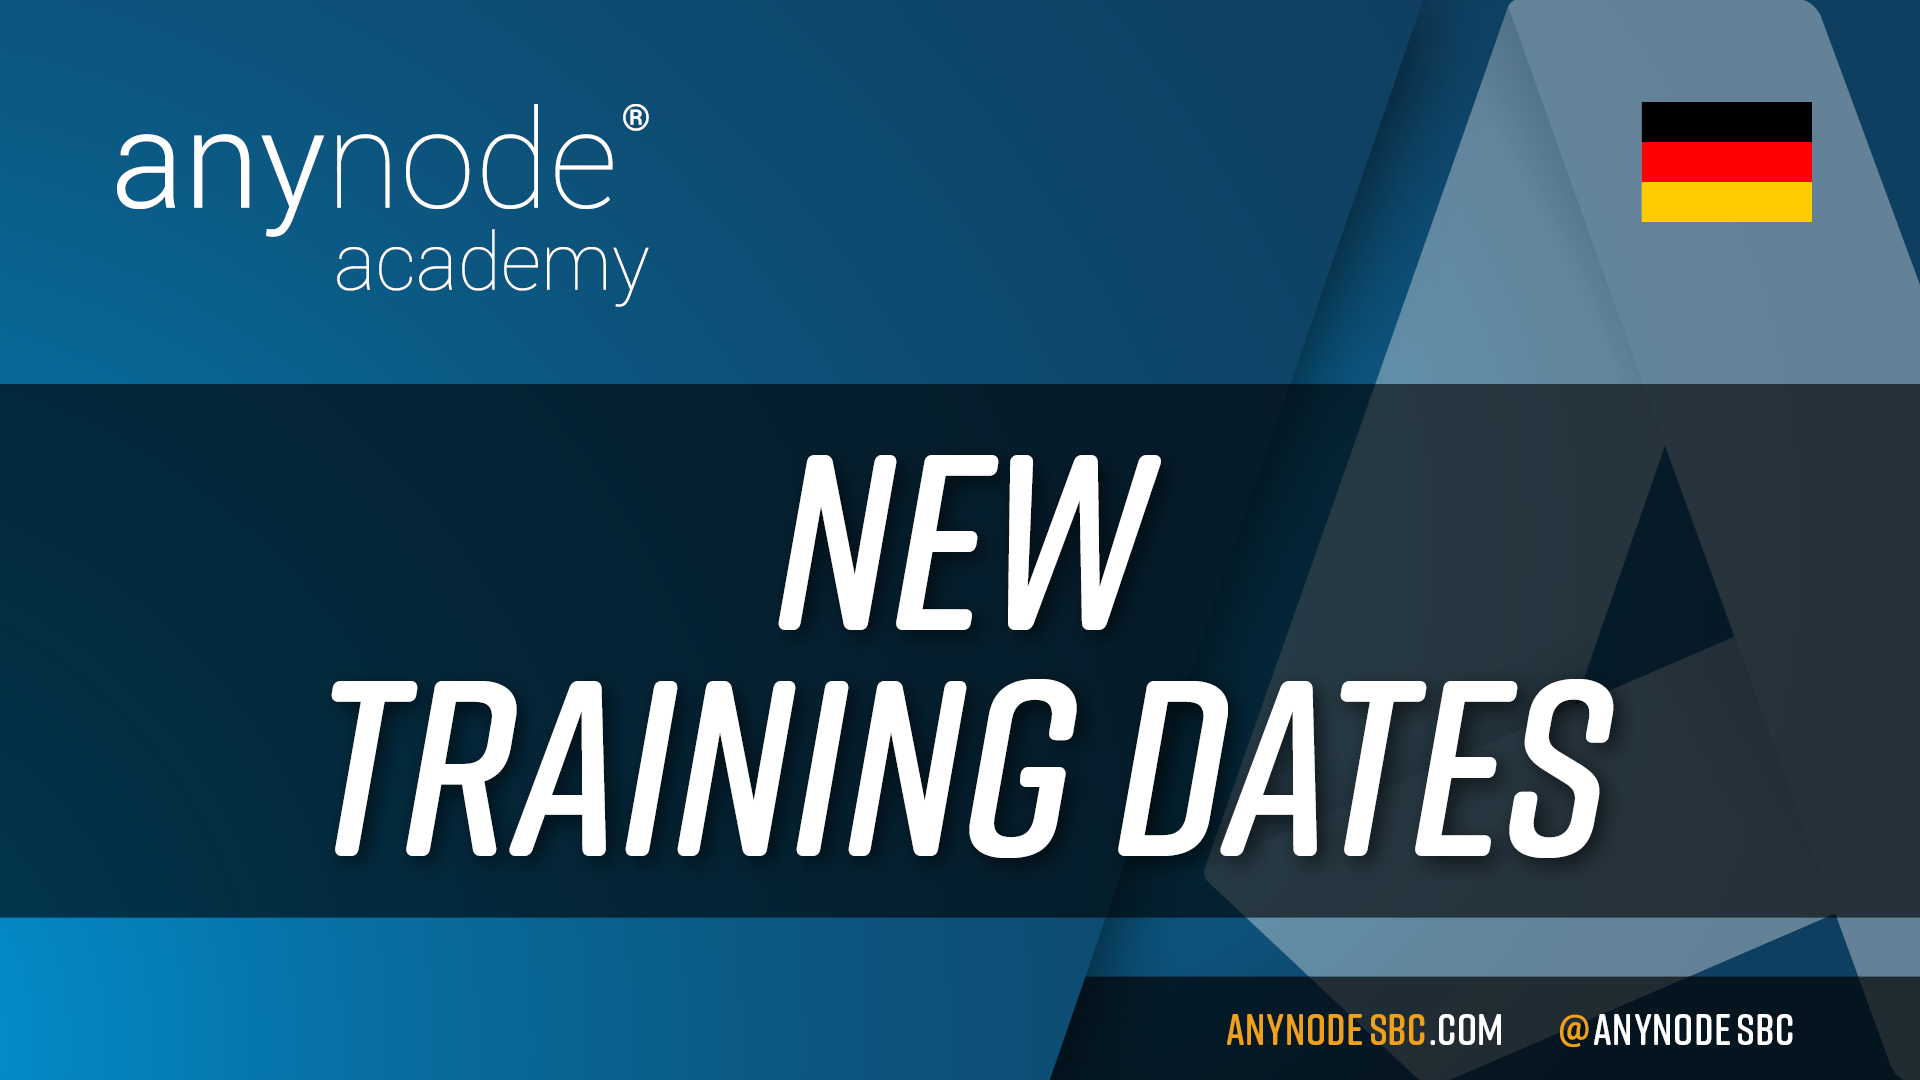 anynode Academy: Easier learning and finally with a personal touch again